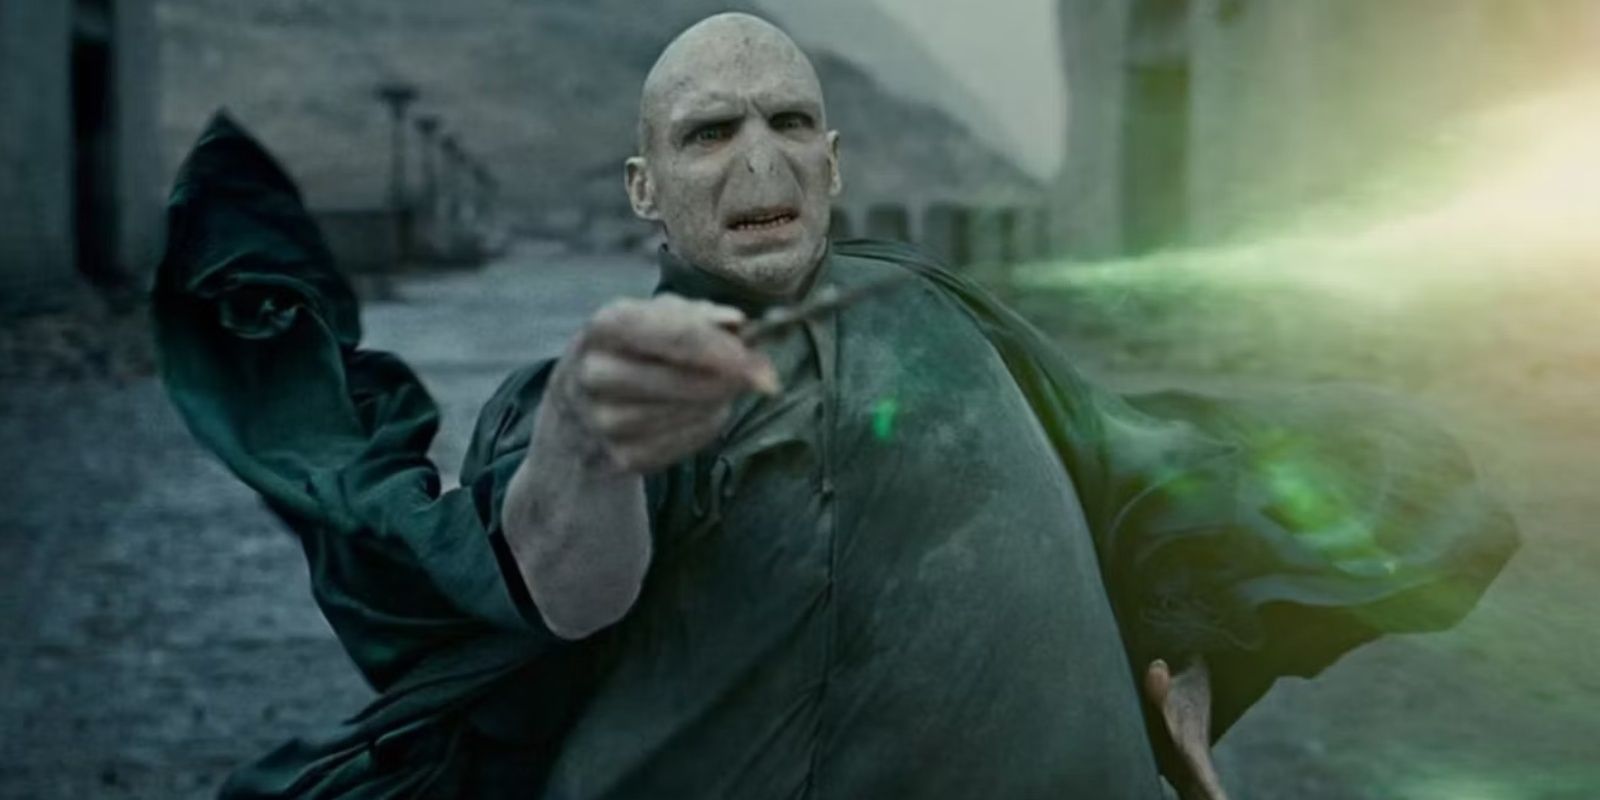 Ralph Fiennes as Voldemort in Harry Potter and the Deathly Hallows Part 2